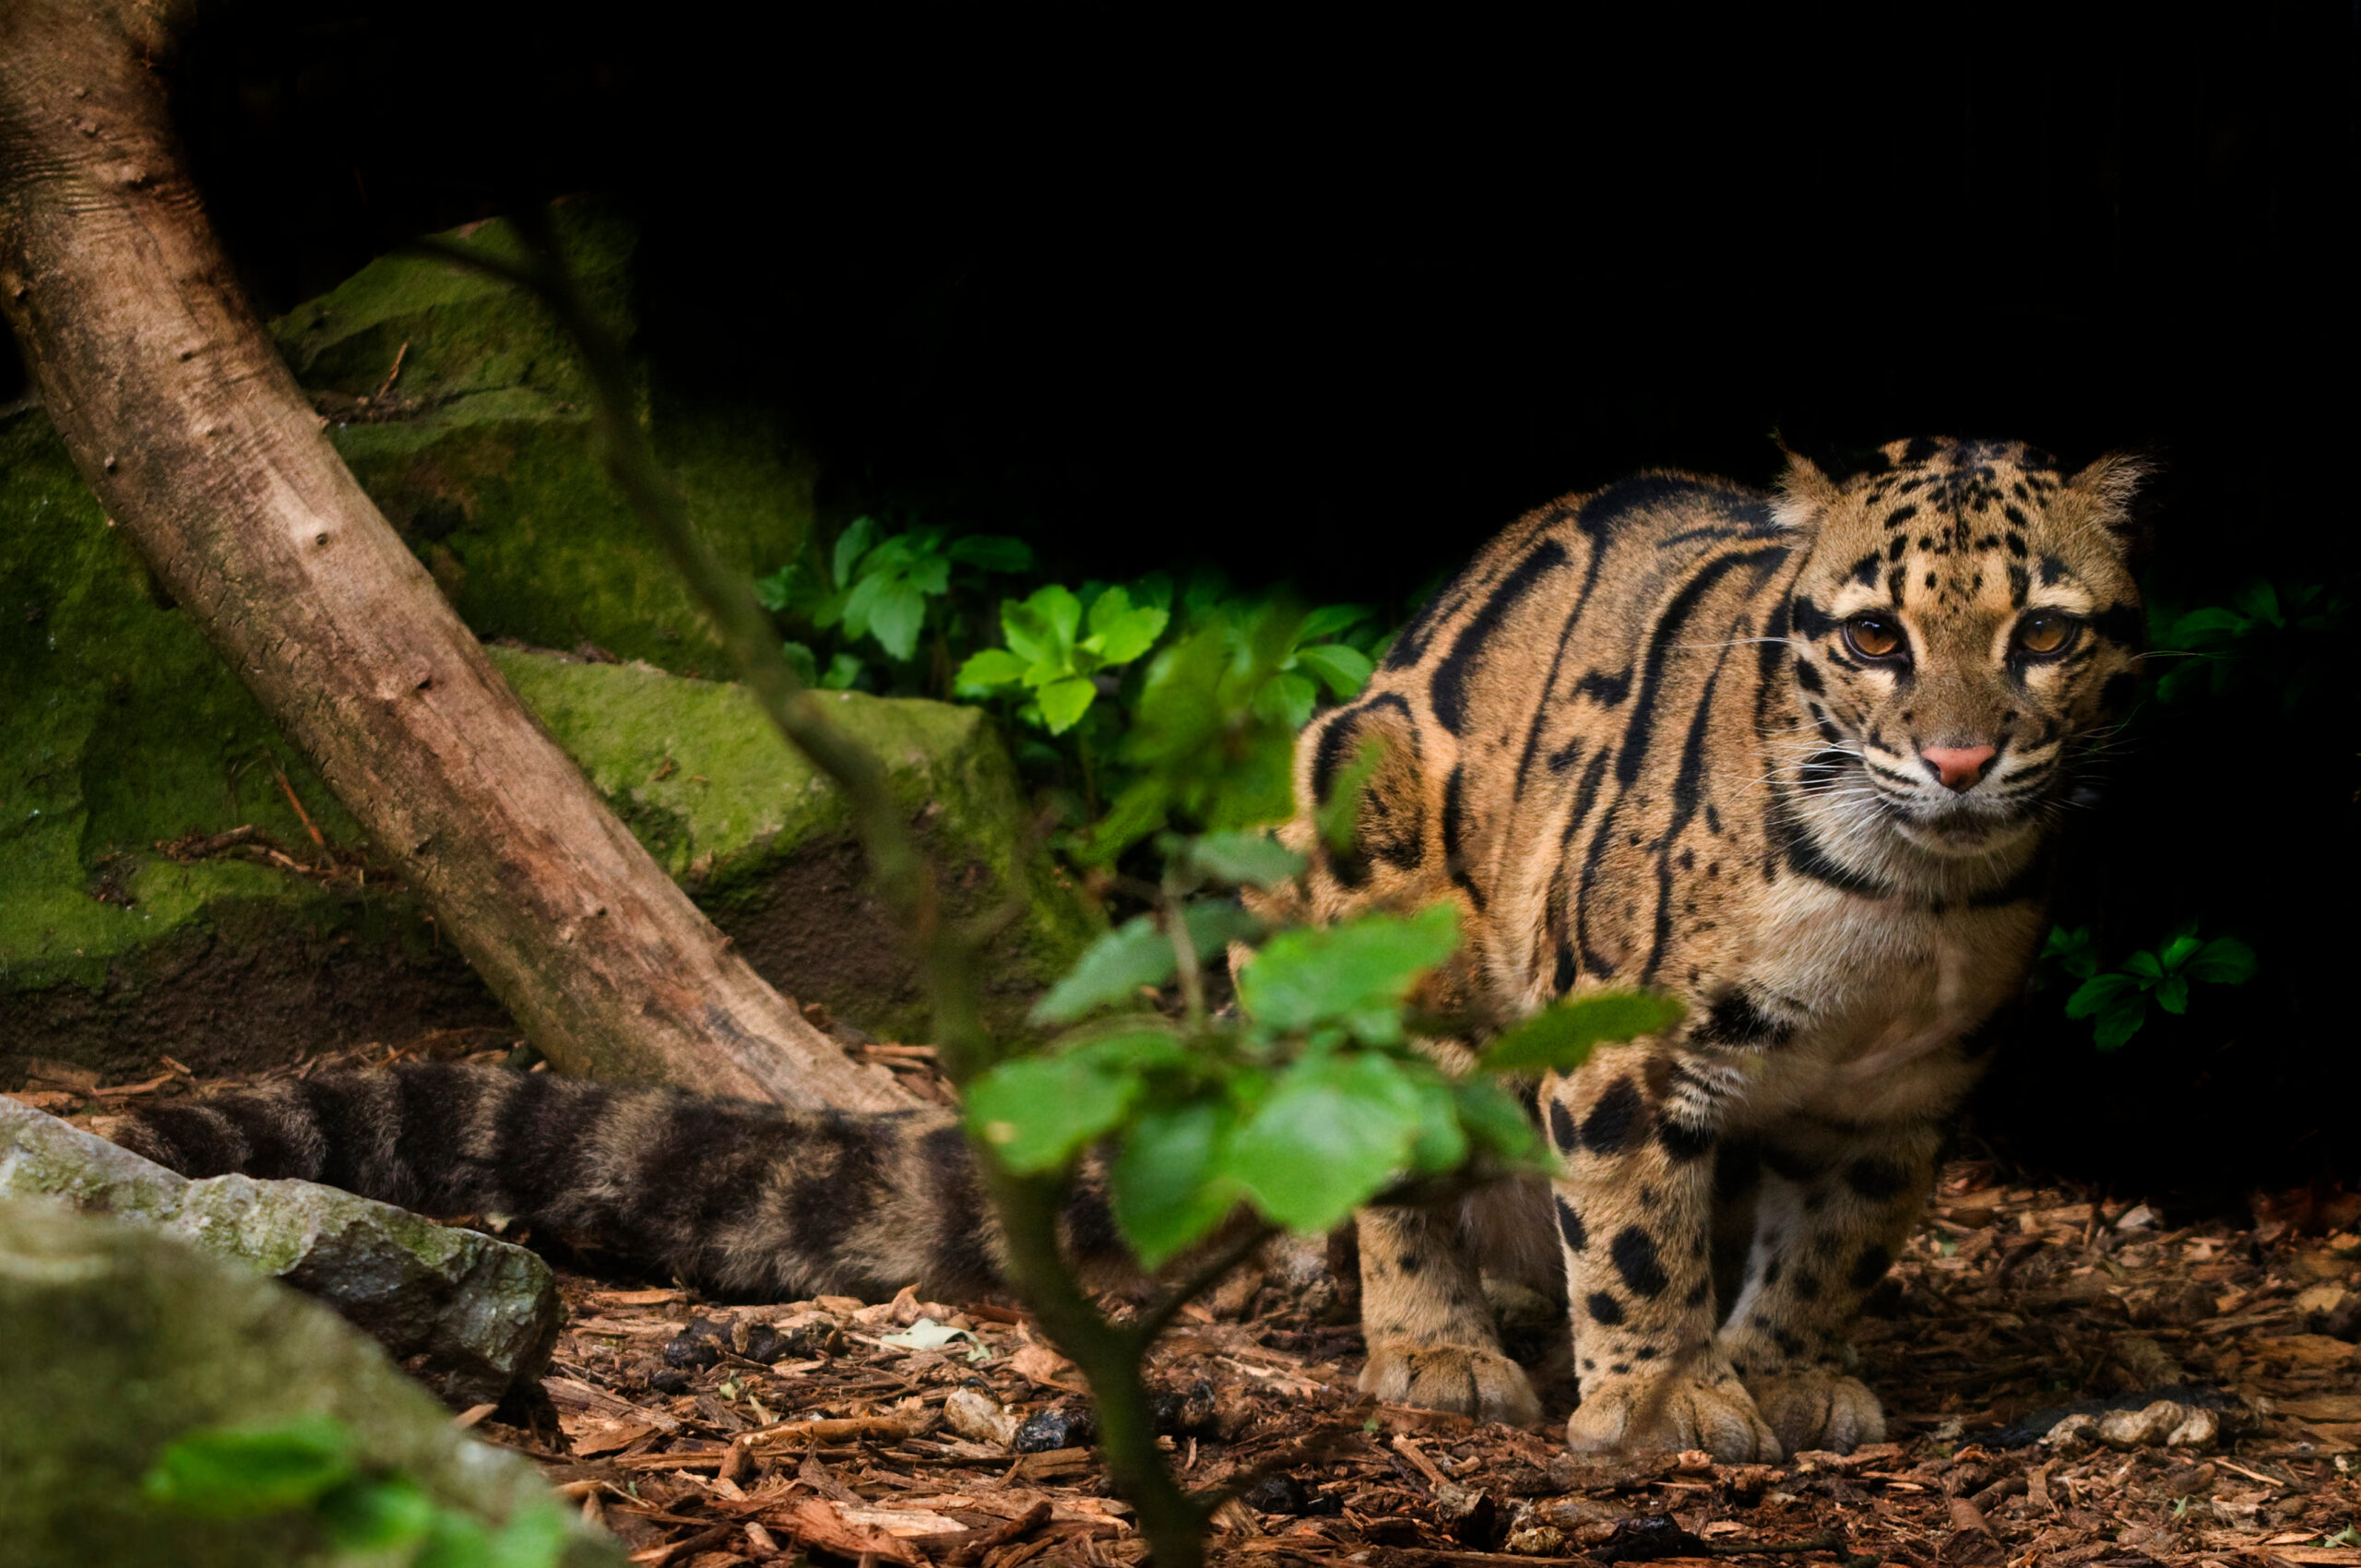 A clouded leopard in captivity.